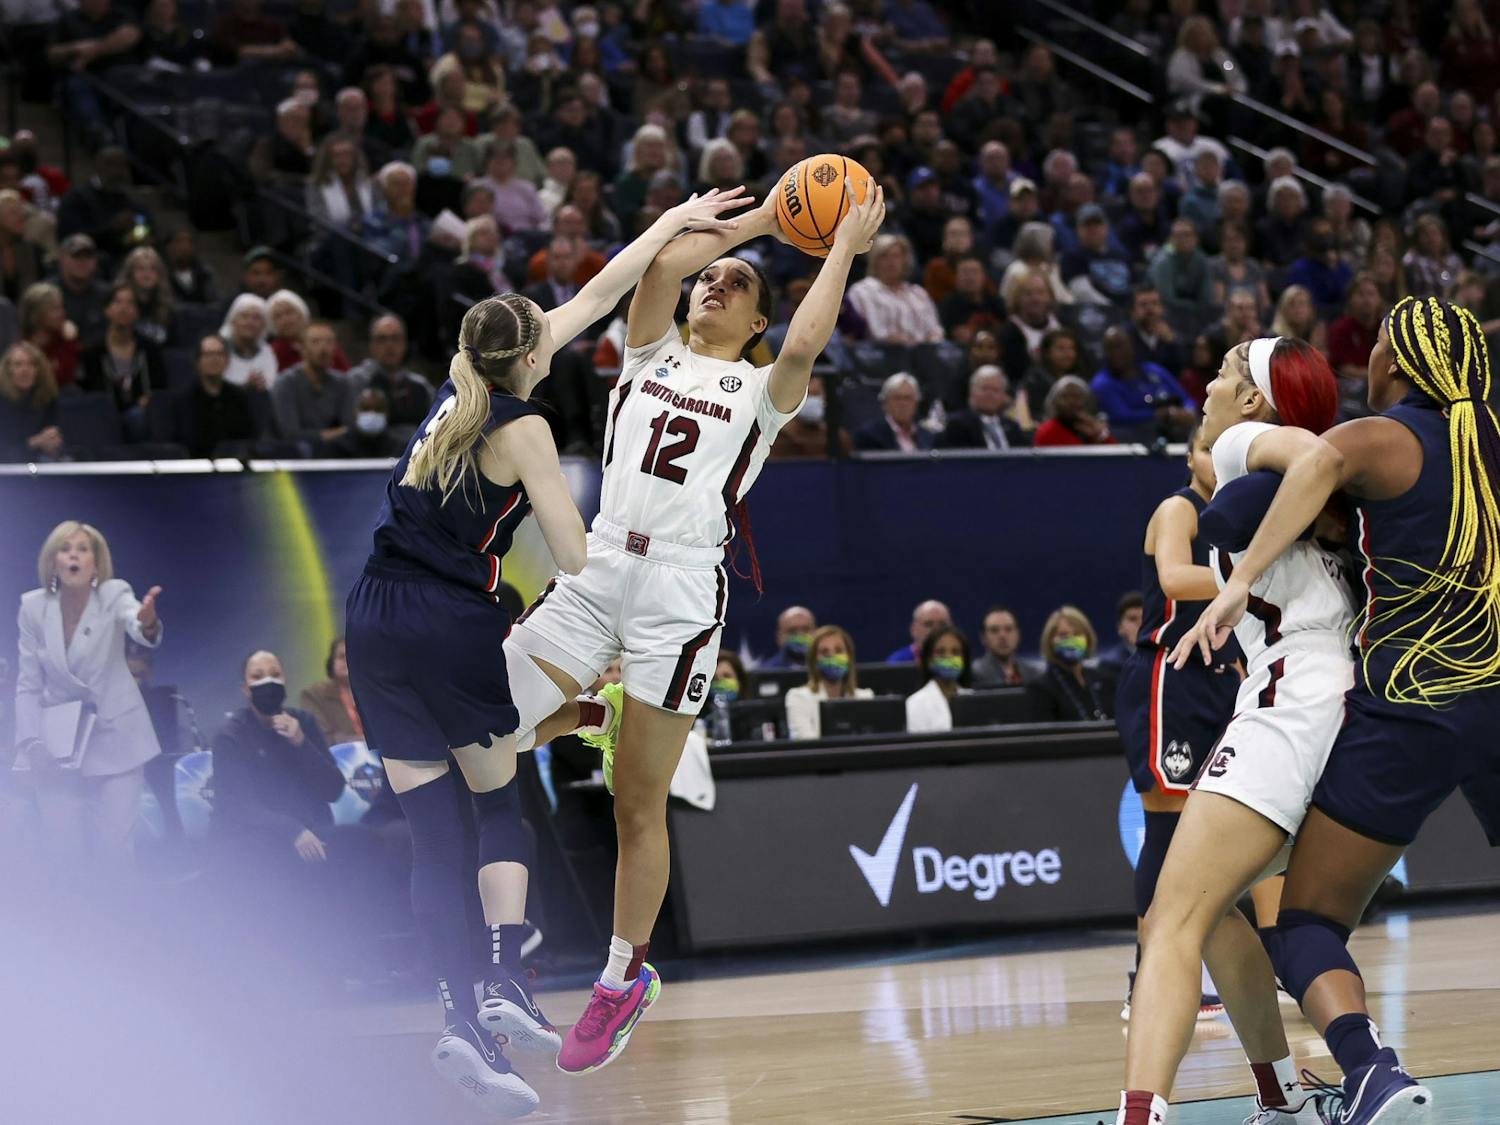 Junior guard Brea Beal goes for a shot inside the paint during the third quarter of South Carolina's 64-49 victory over University of Connecticut, winning the 2022 National Championship on April 3, 2022.